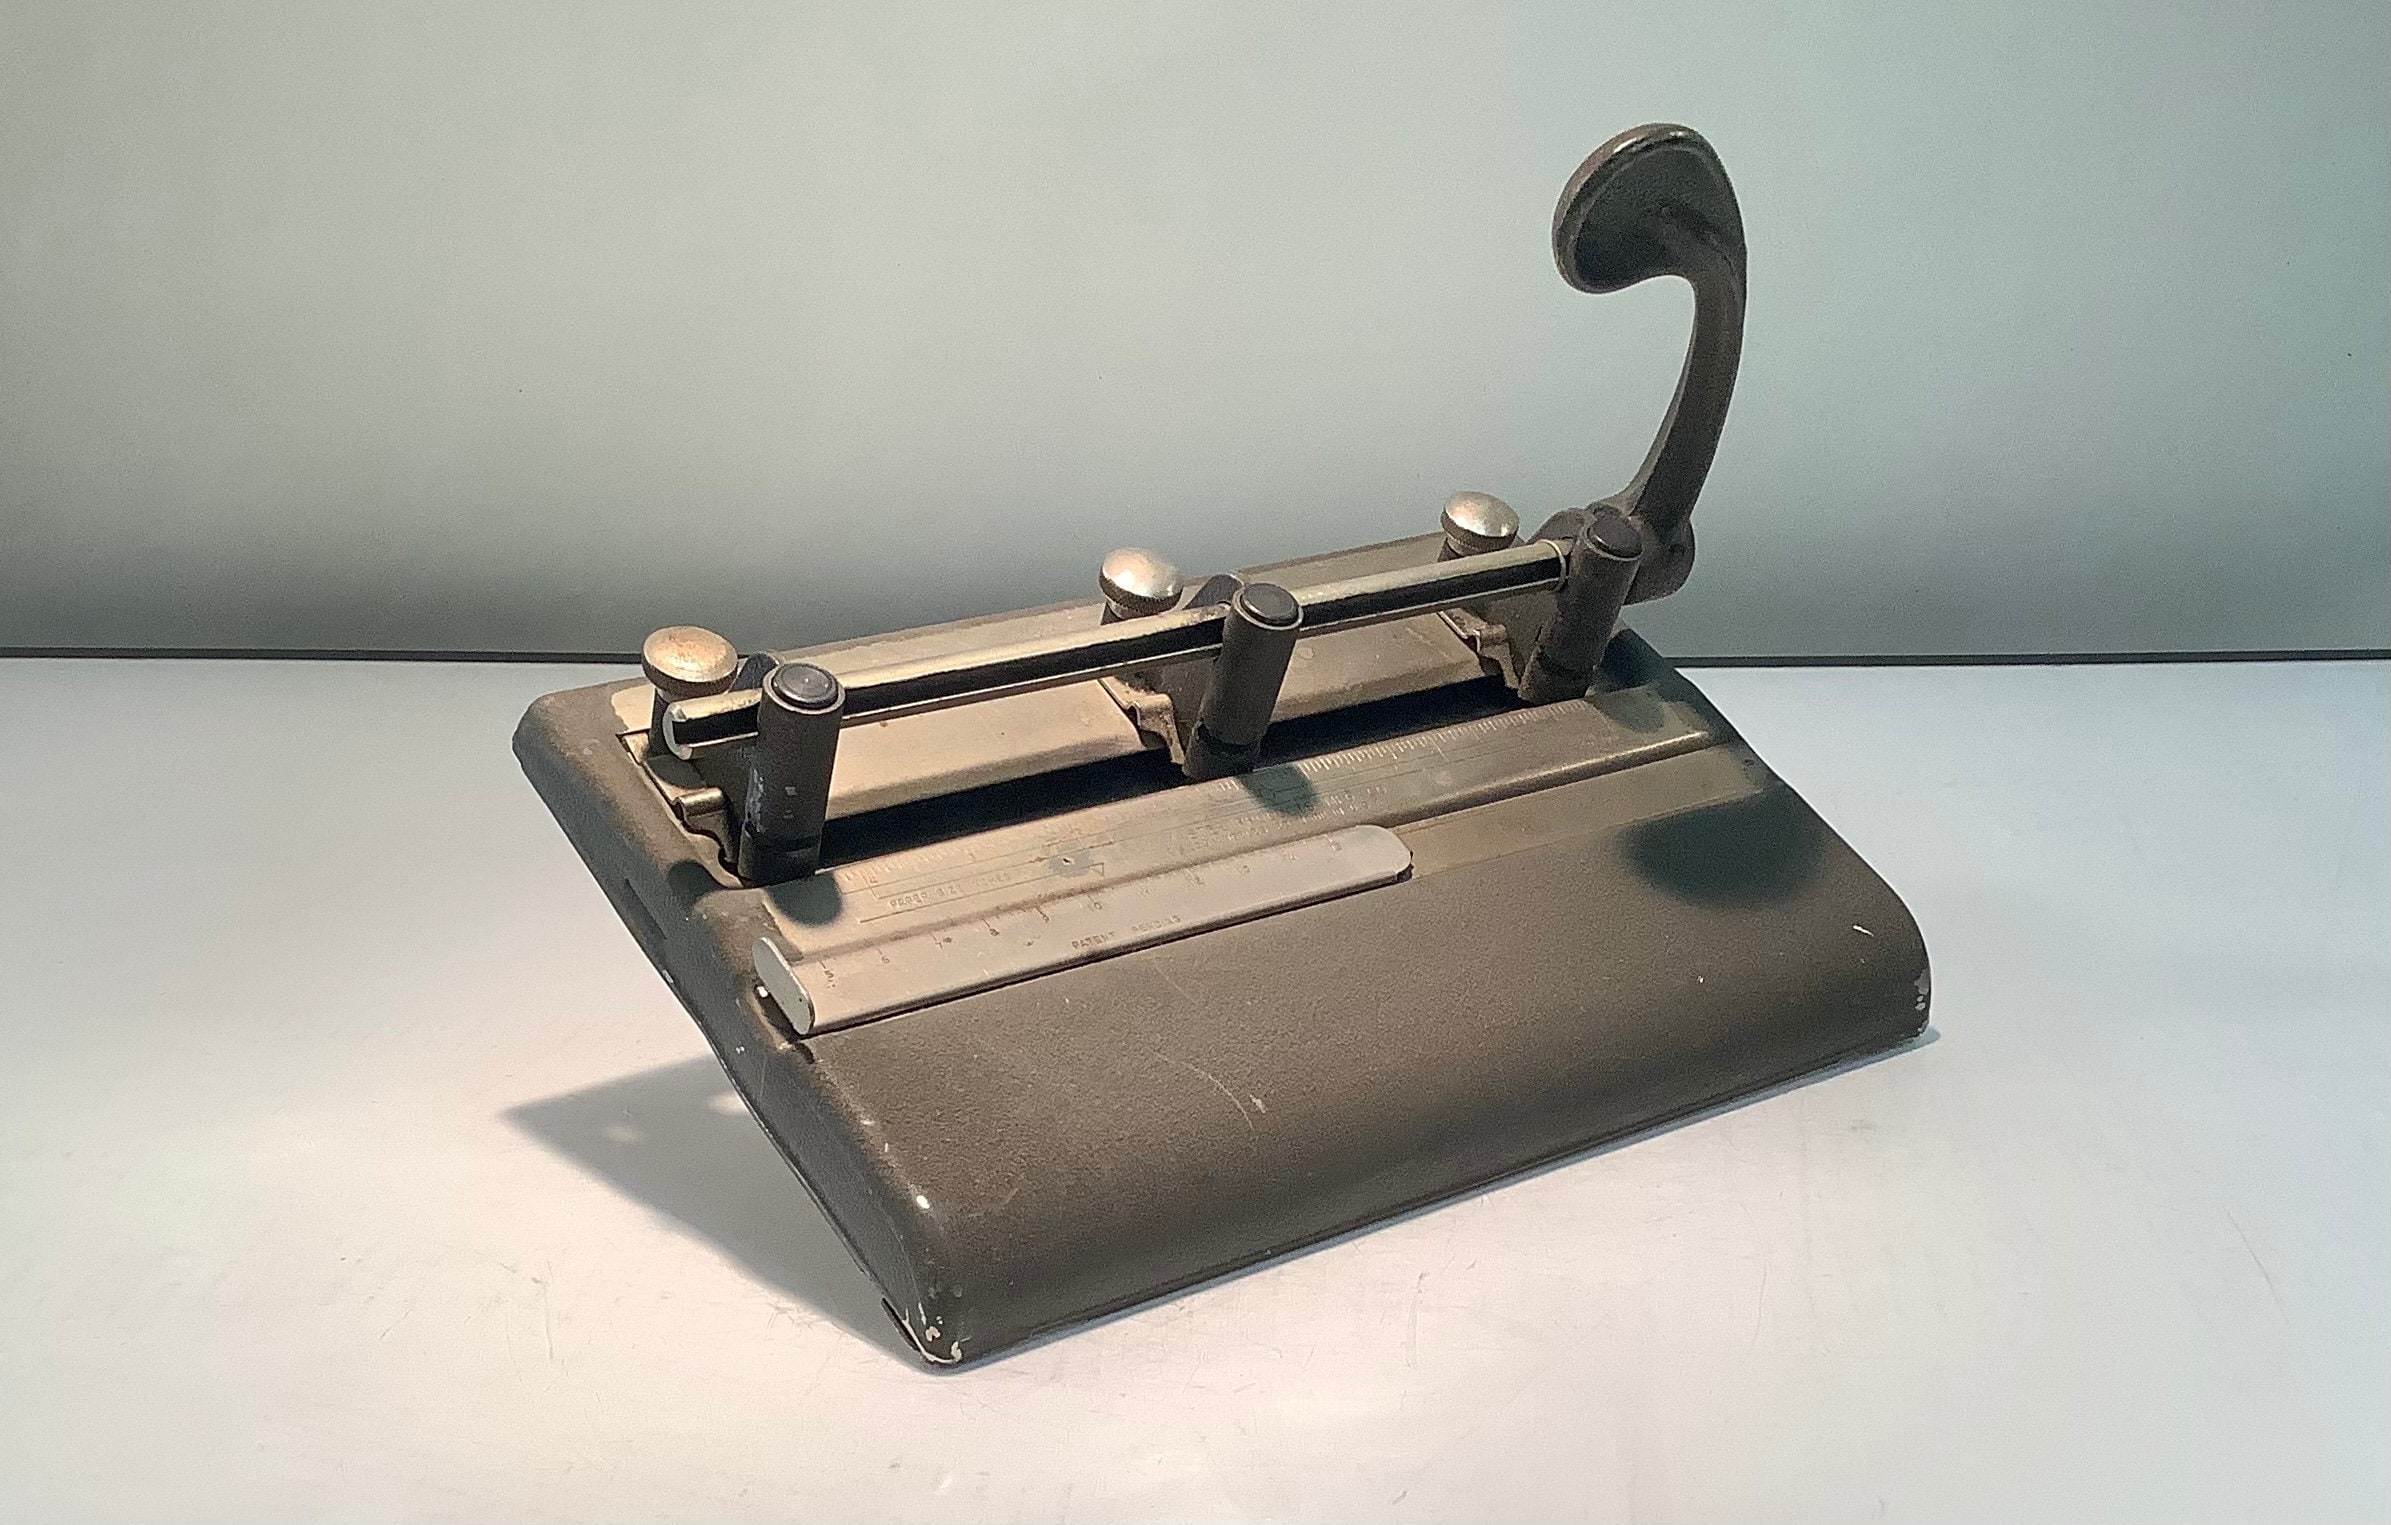 Vintage Master Products MFG CO Heavy Duty 3 Hole Punch Model 3-25 Adjustable